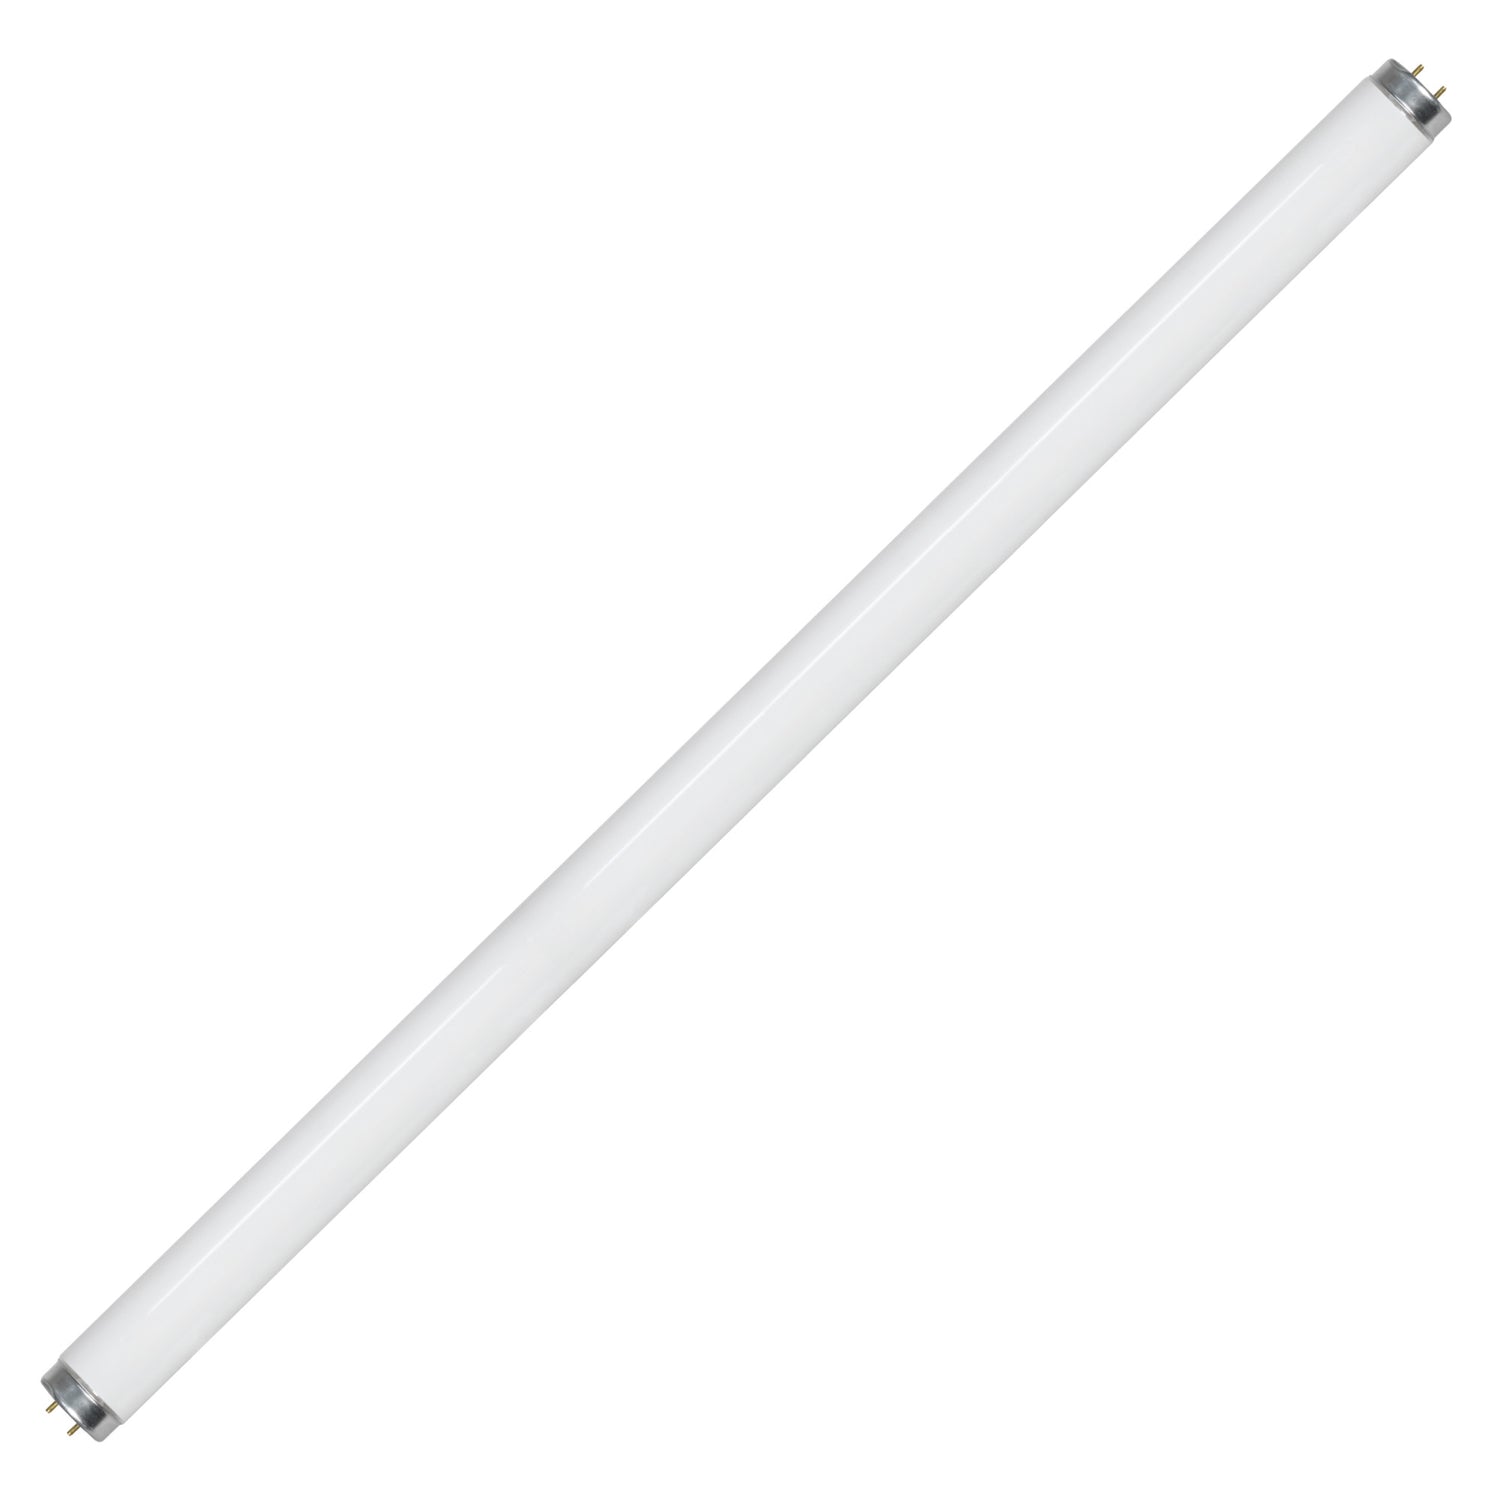 3 ft. 30W Cool White (4100K) G13 Base (T12 Replacement) Fluorescent Linear Light Tube (2-Pack)